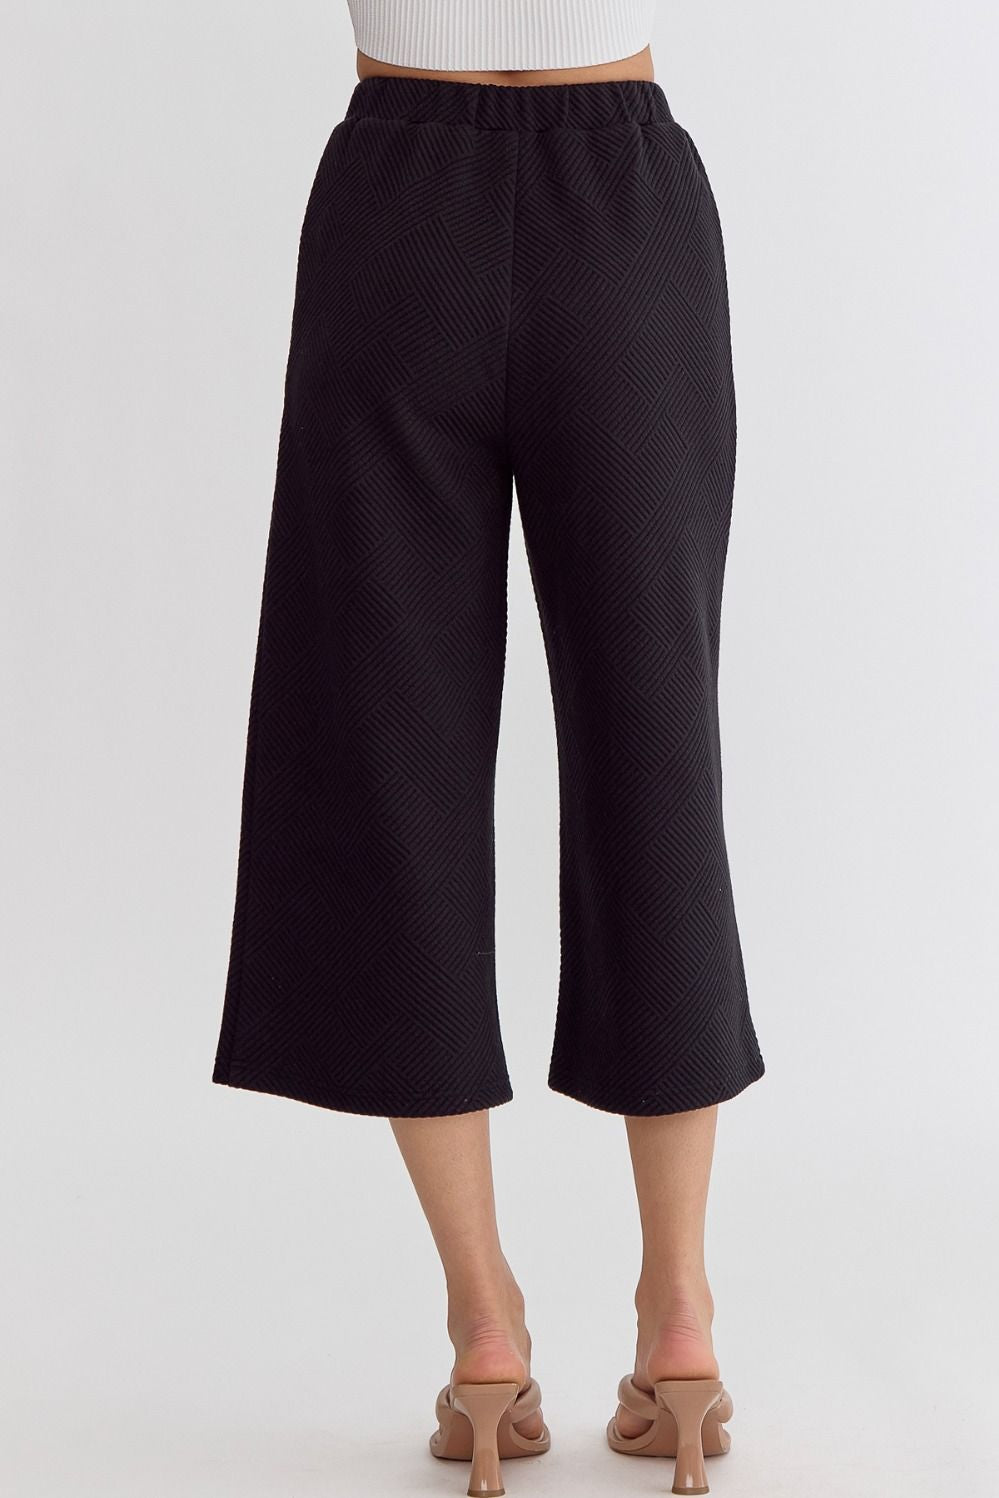 Wendy Textured Cropped Pants